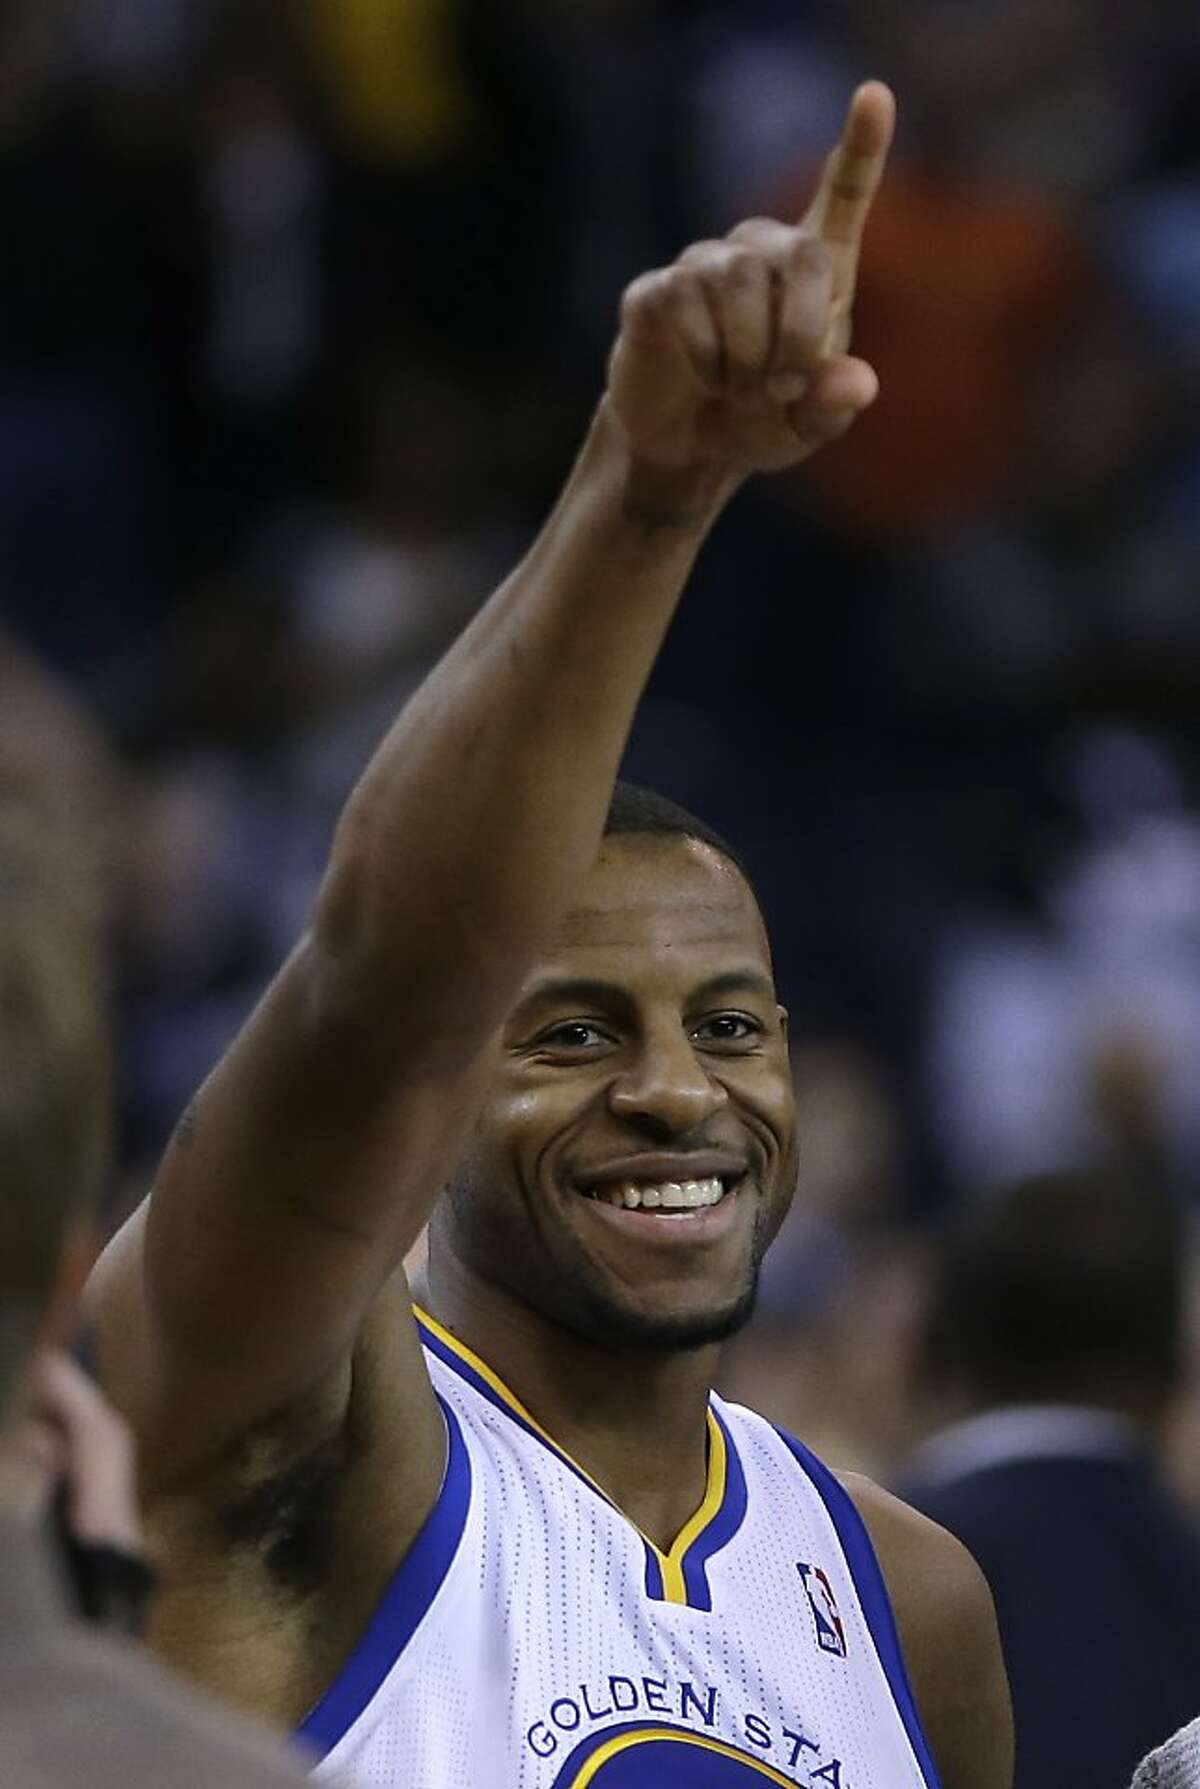 Golden State Warriors' Andre Iguodala celebrates after making the game-winning score over the Oklahoma City Thunder during the second half of an NBA basketball game Thursday, Nov. 14, 2013, in Oakland, Calif. (AP Photo/Ben Margot)